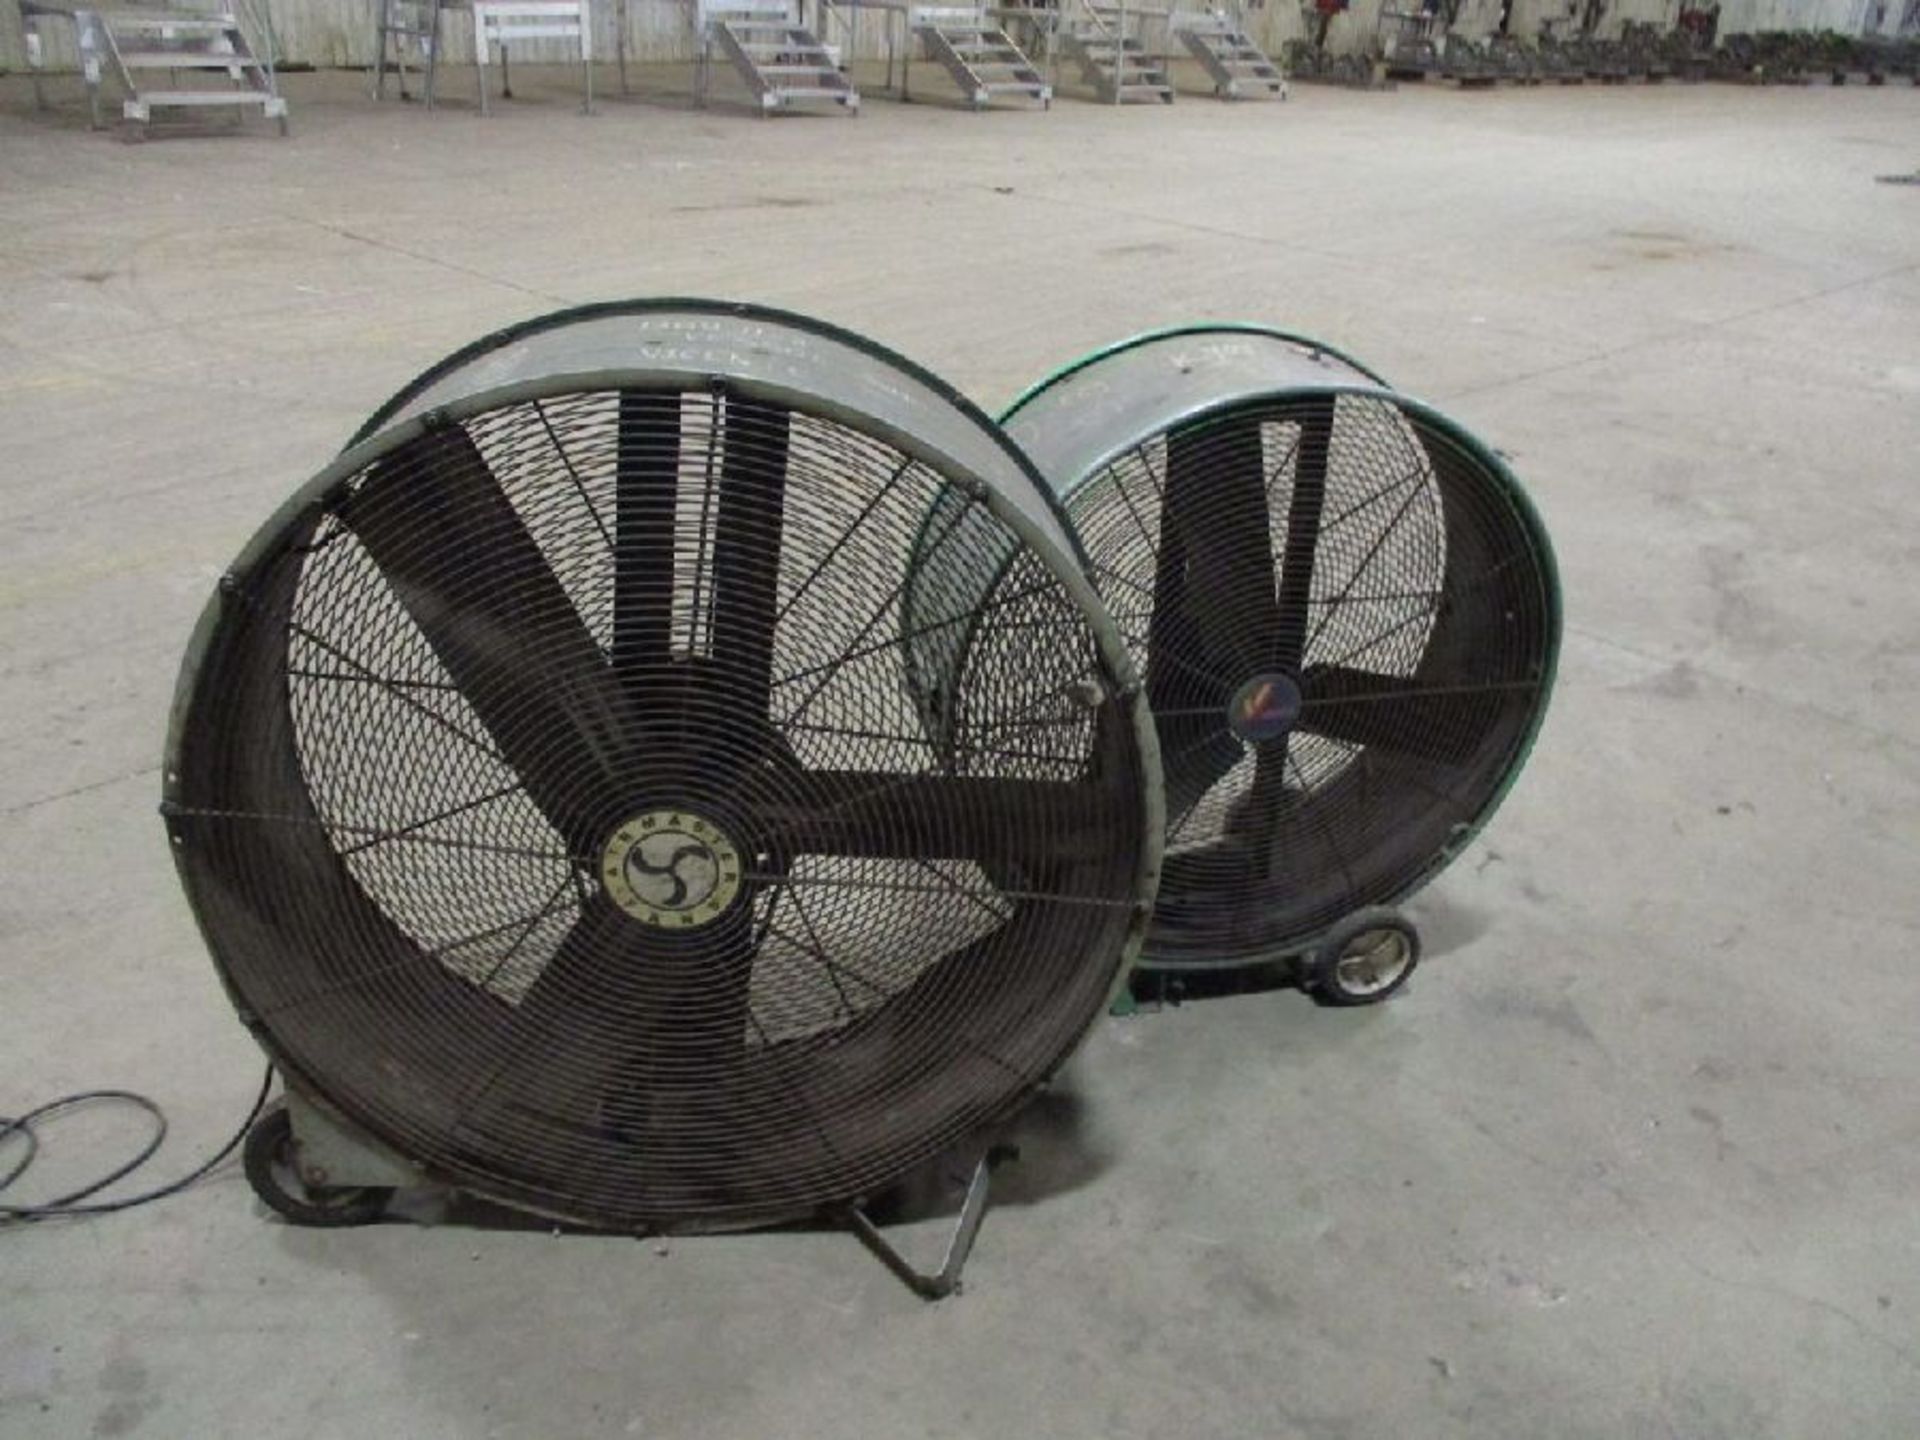 Lot of (1) Venco 36" and (1) Air Master 42" Portable Fan - Image 3 of 3